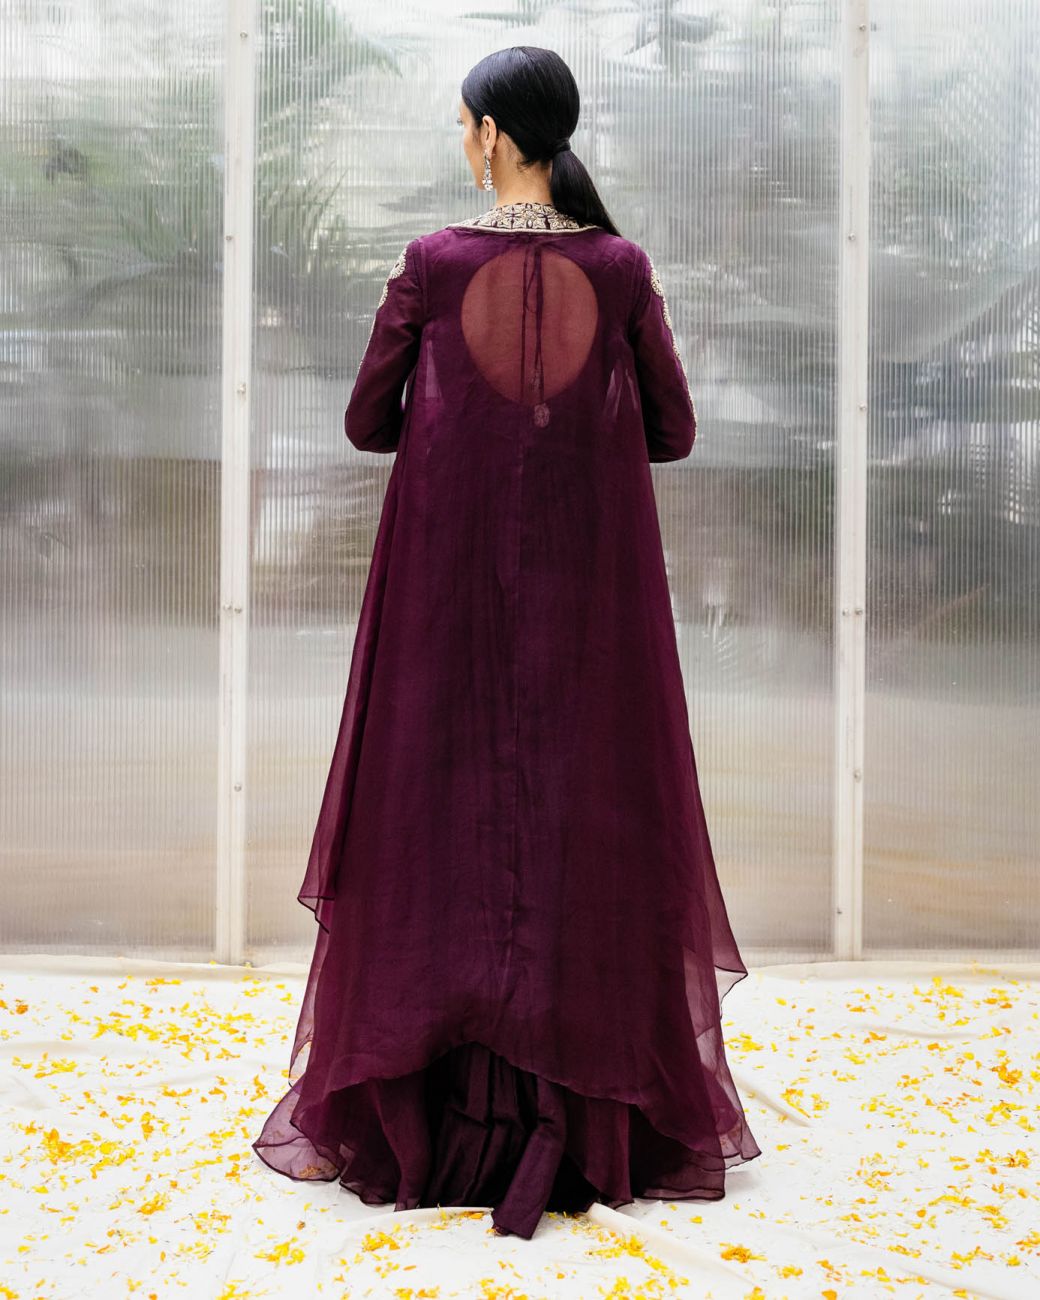 Plum Anarkali With Embroidered Cape - Indian Clothing in Denver, CO, Aurora, CO, Boulder, CO, Fort Collins, CO, Colorado Springs, CO, Parker, CO, Highlands Ranch, CO, Cherry Creek, CO, Centennial, CO, and Longmont, CO. Nationwide shipping USA - India Fashion X